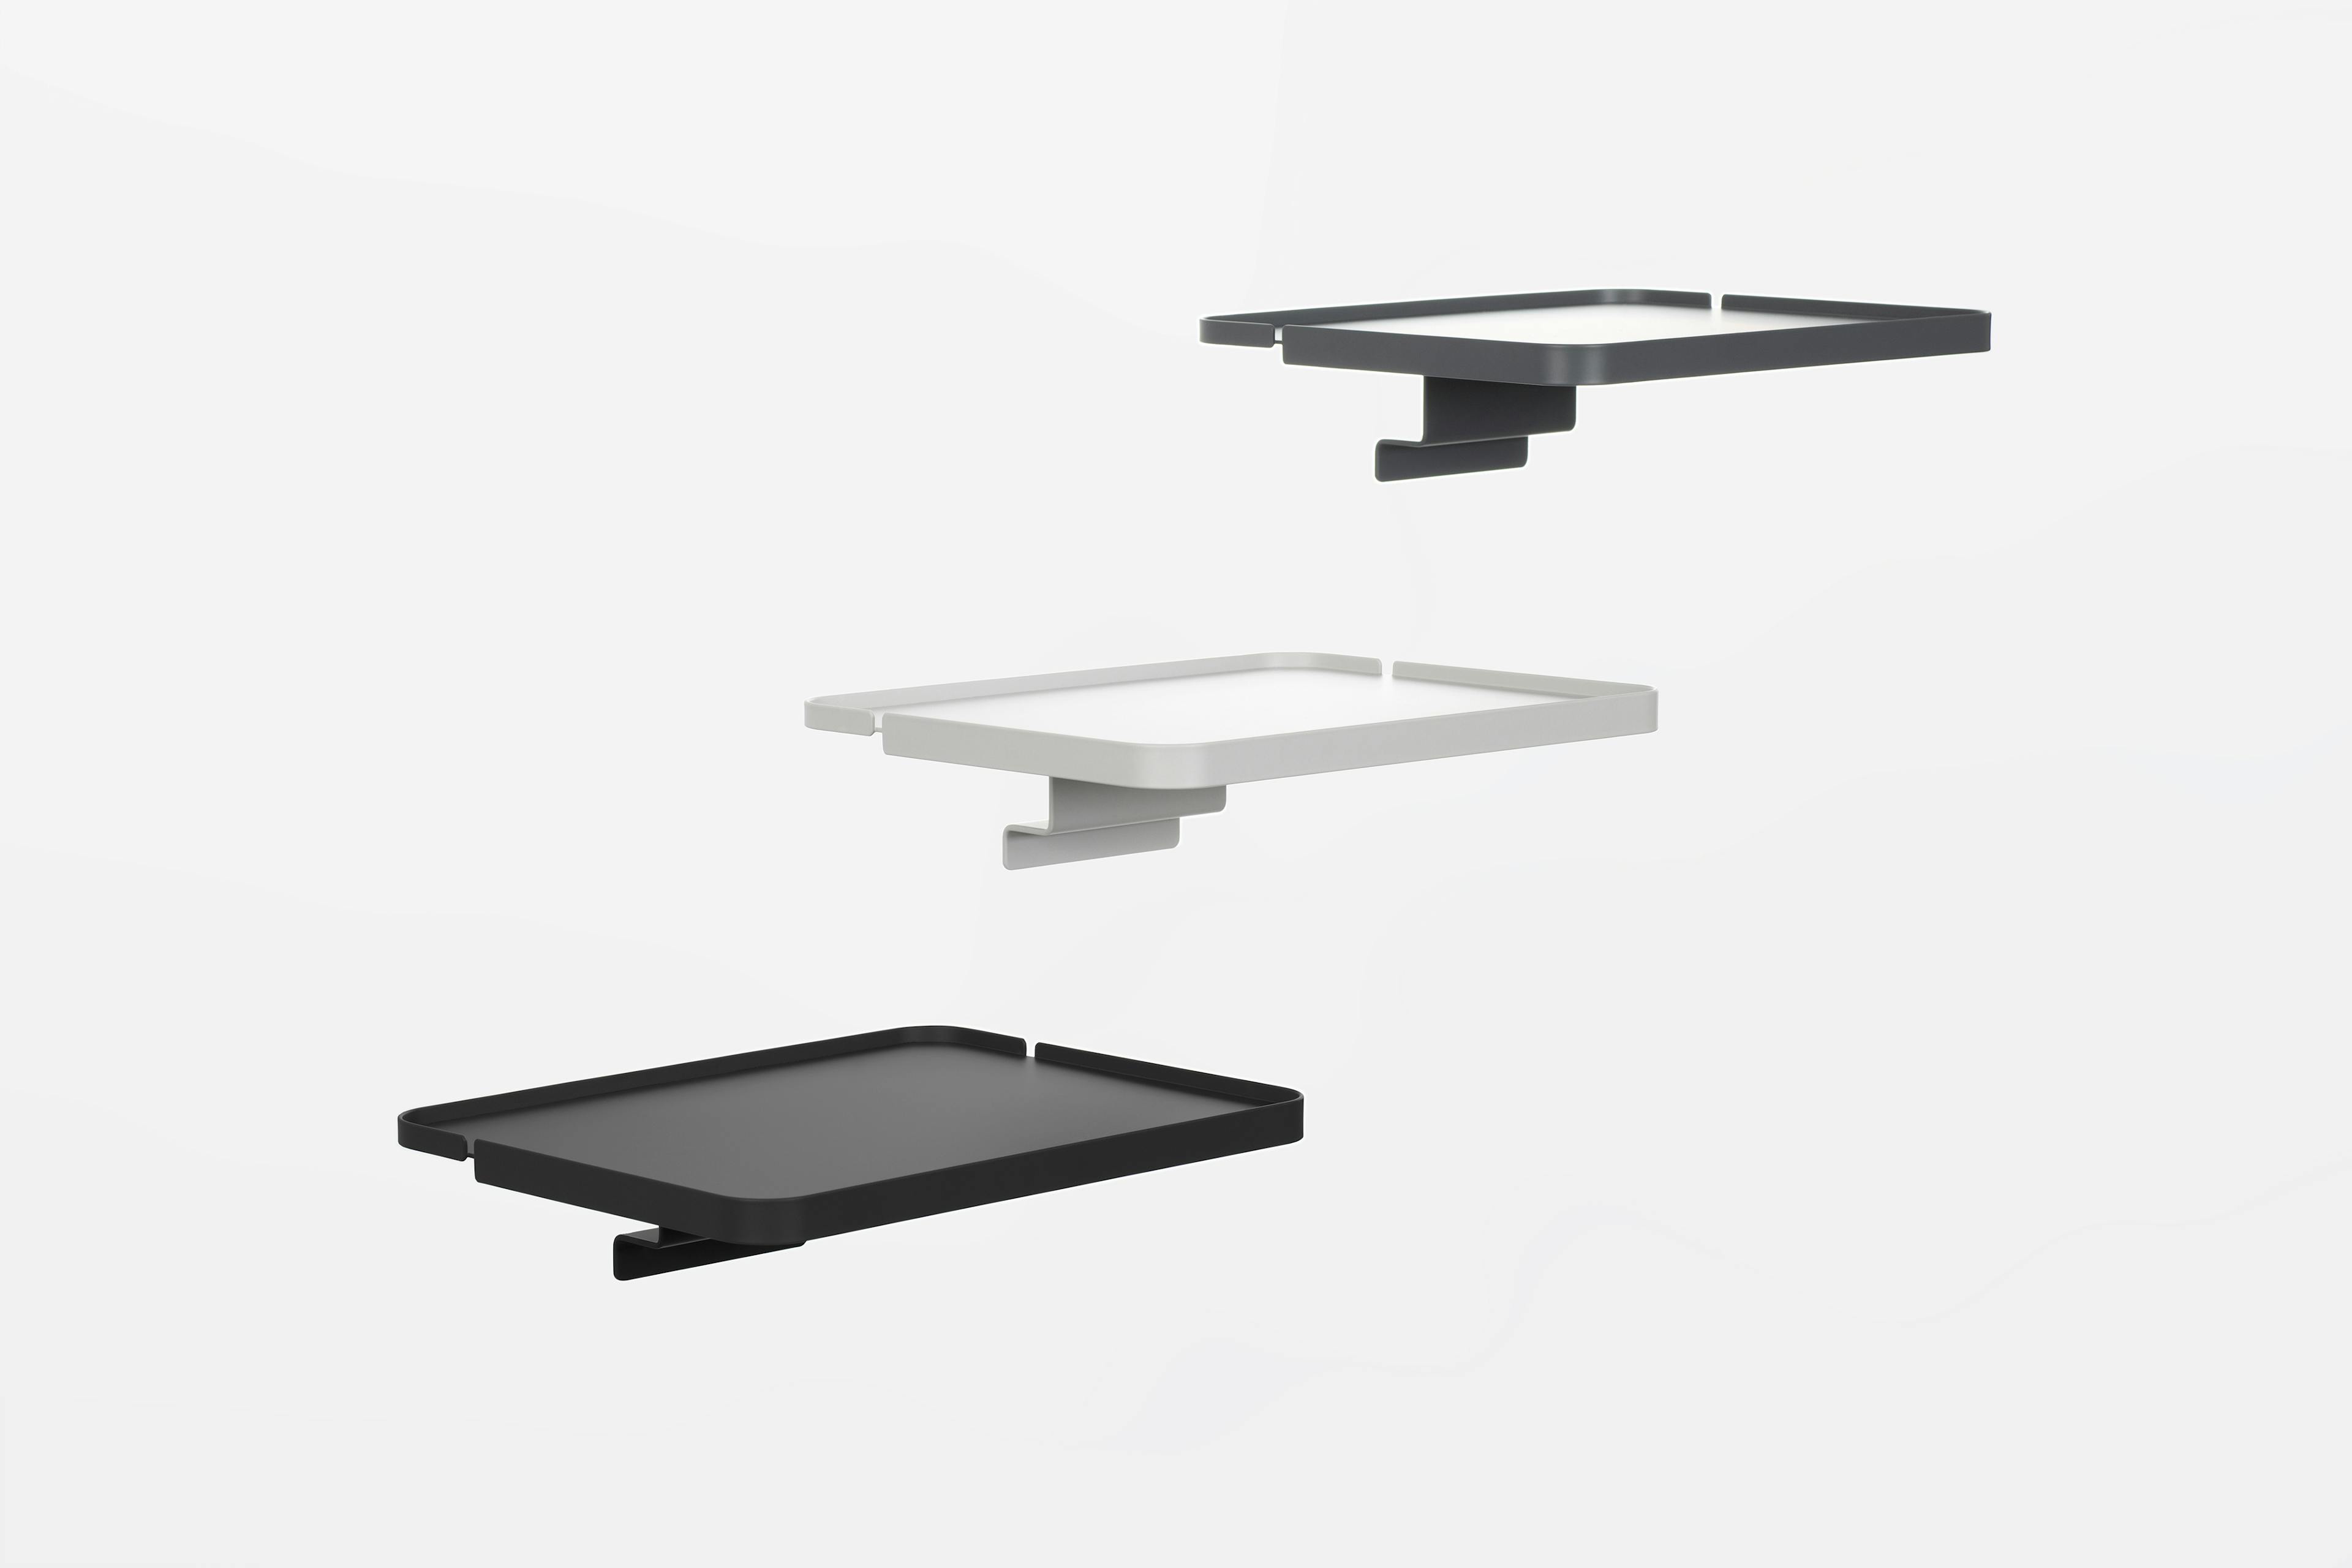 The Tray Product in Matte Black Color